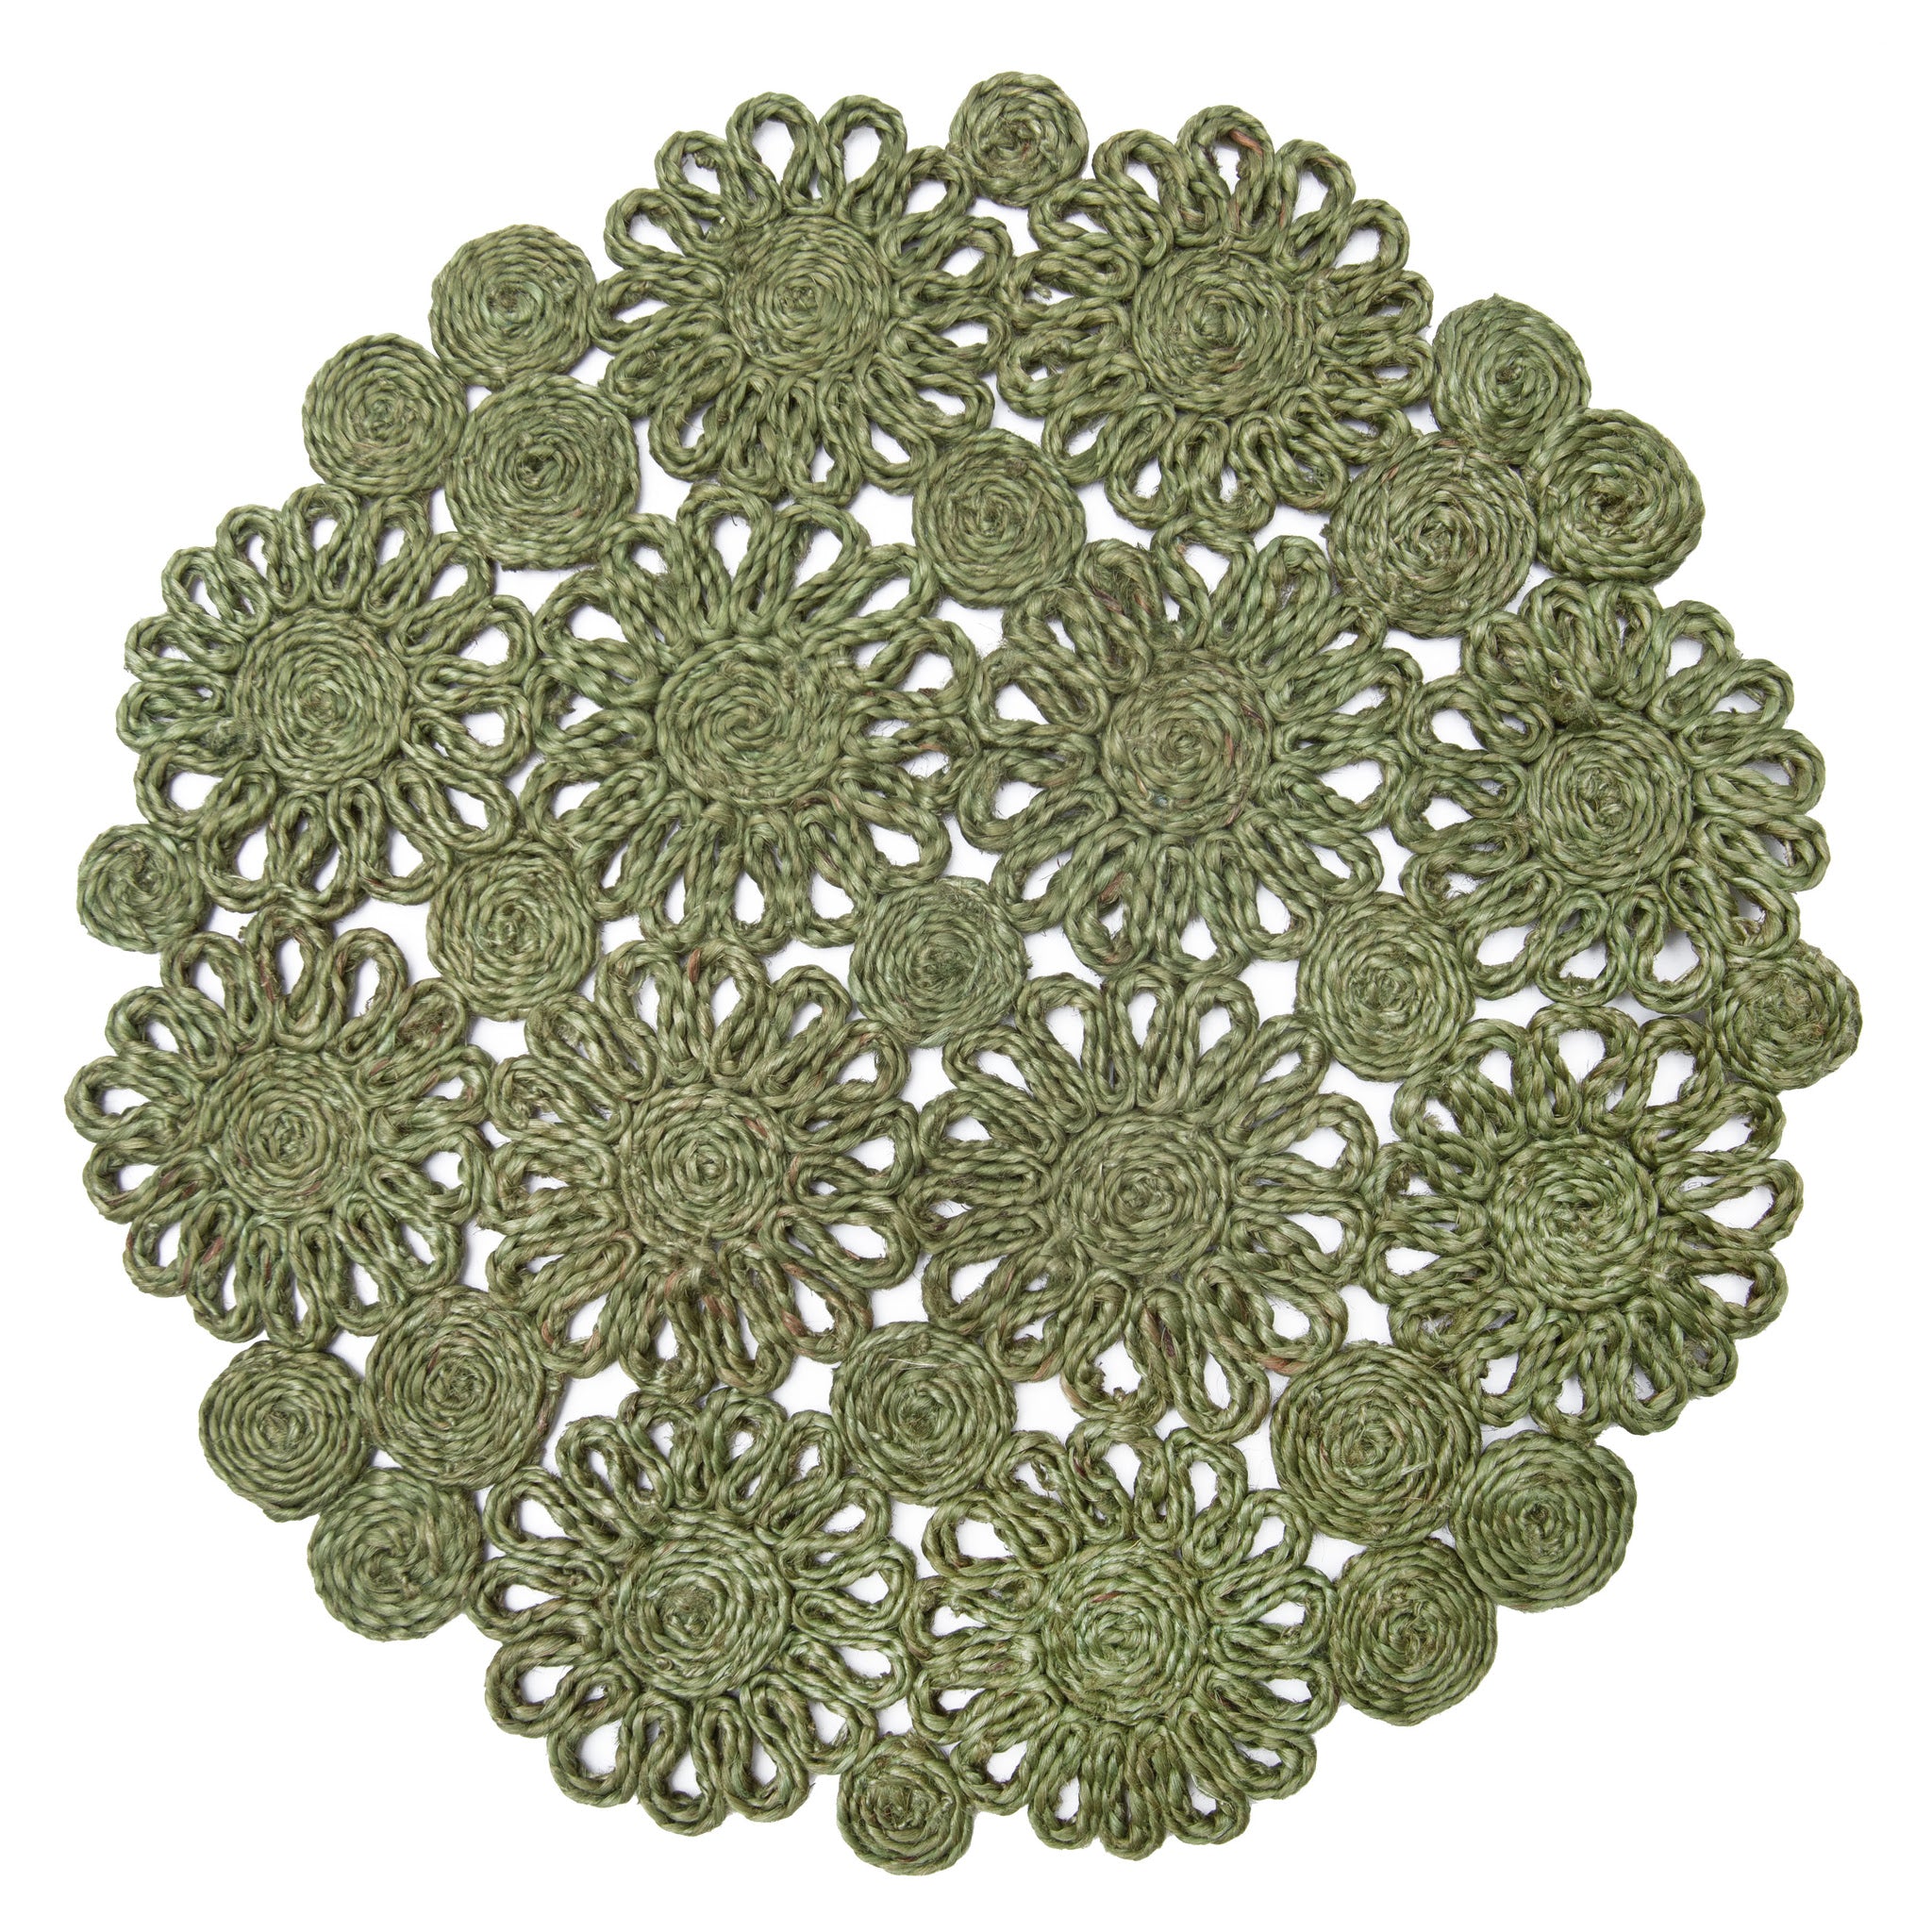 Daisy Jute 15" Round Placemat - Set of 4